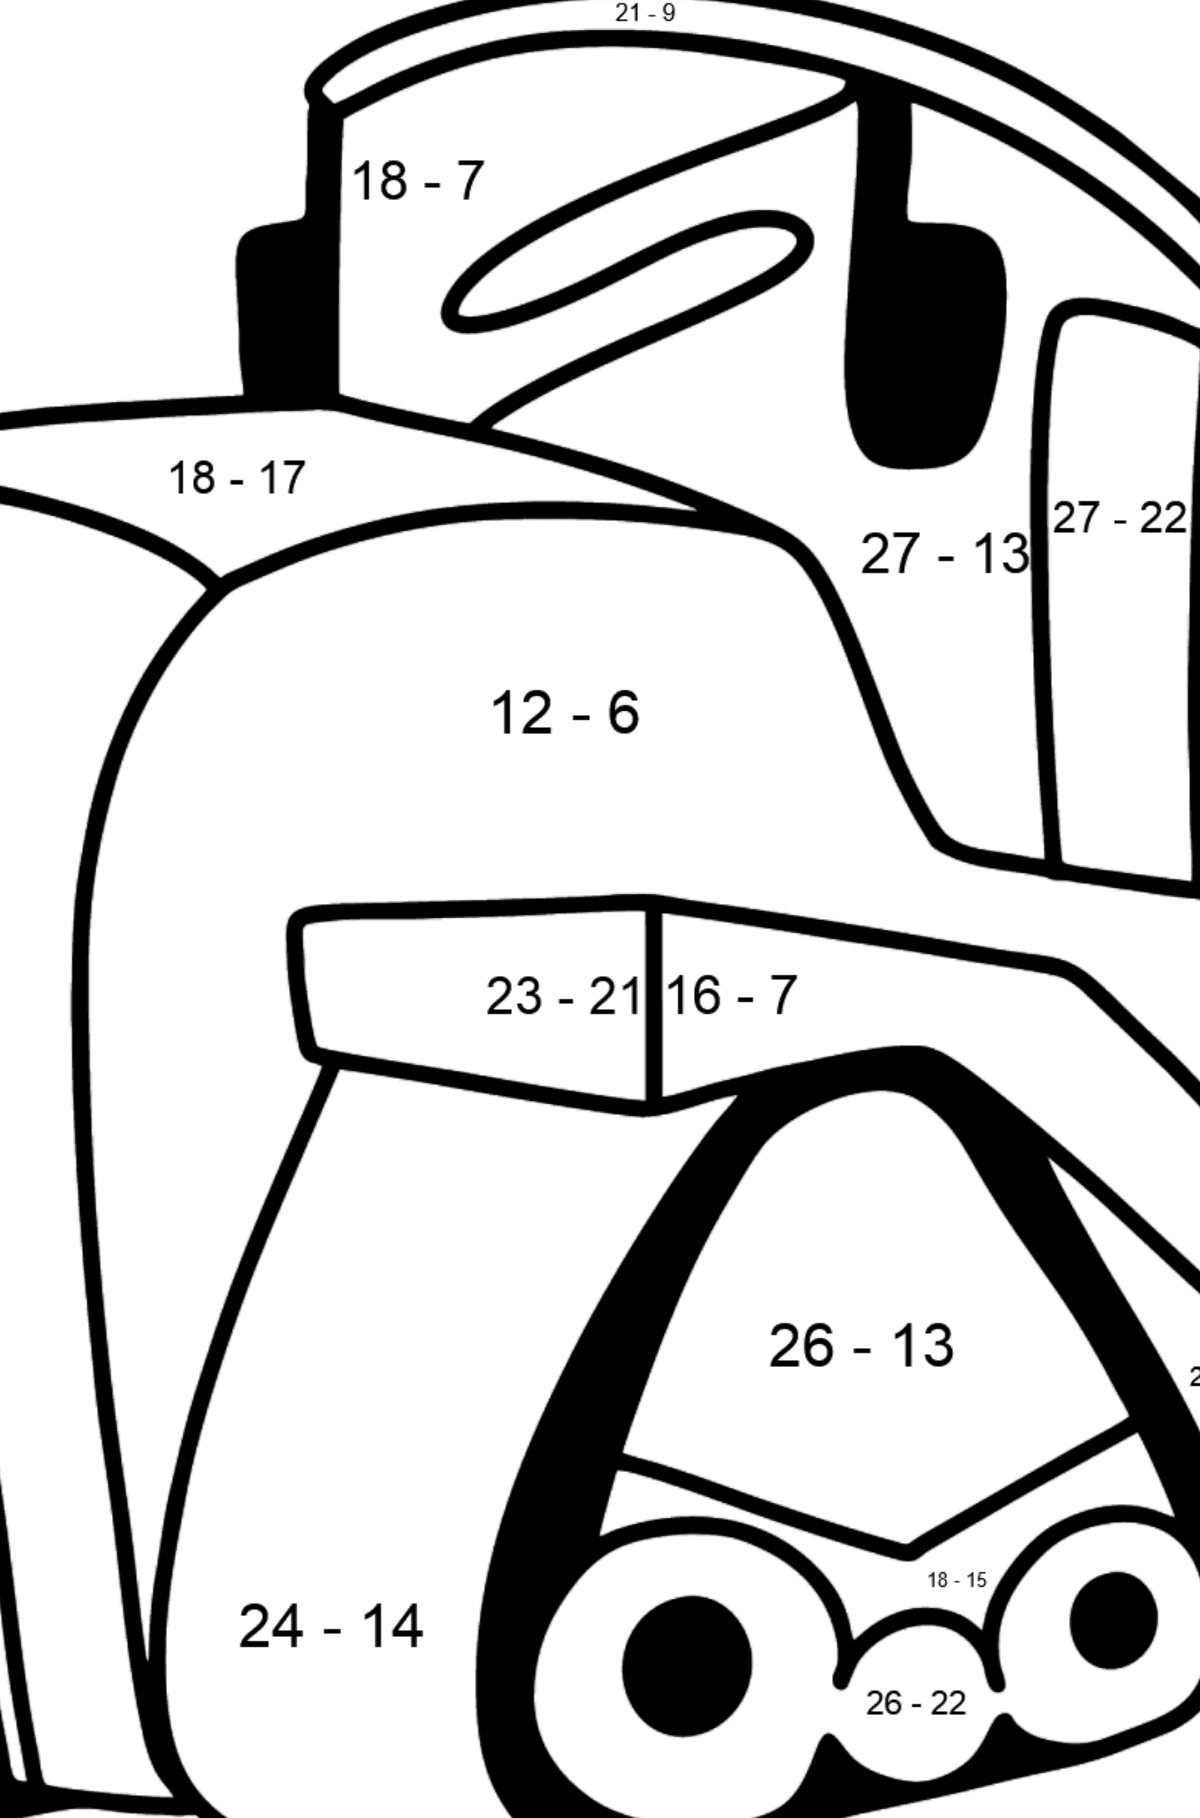 Big Heavy Tractor coloring page - Math Coloring - Subtraction for Kids